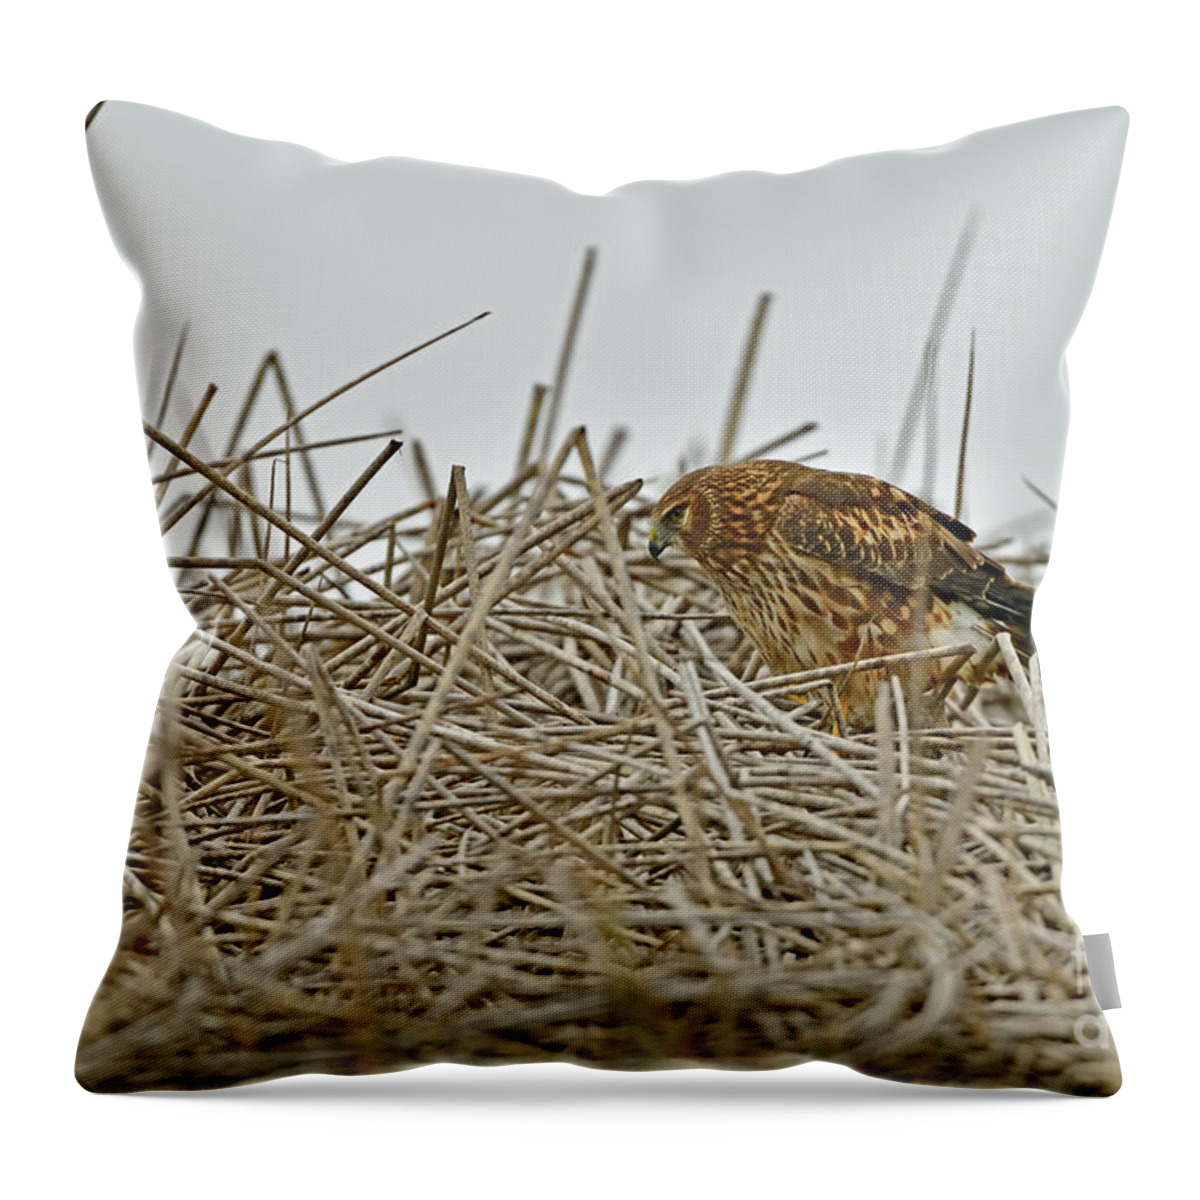 Hawk Throw Pillow featuring the photograph A Hawk by Amazing Action Photo Video